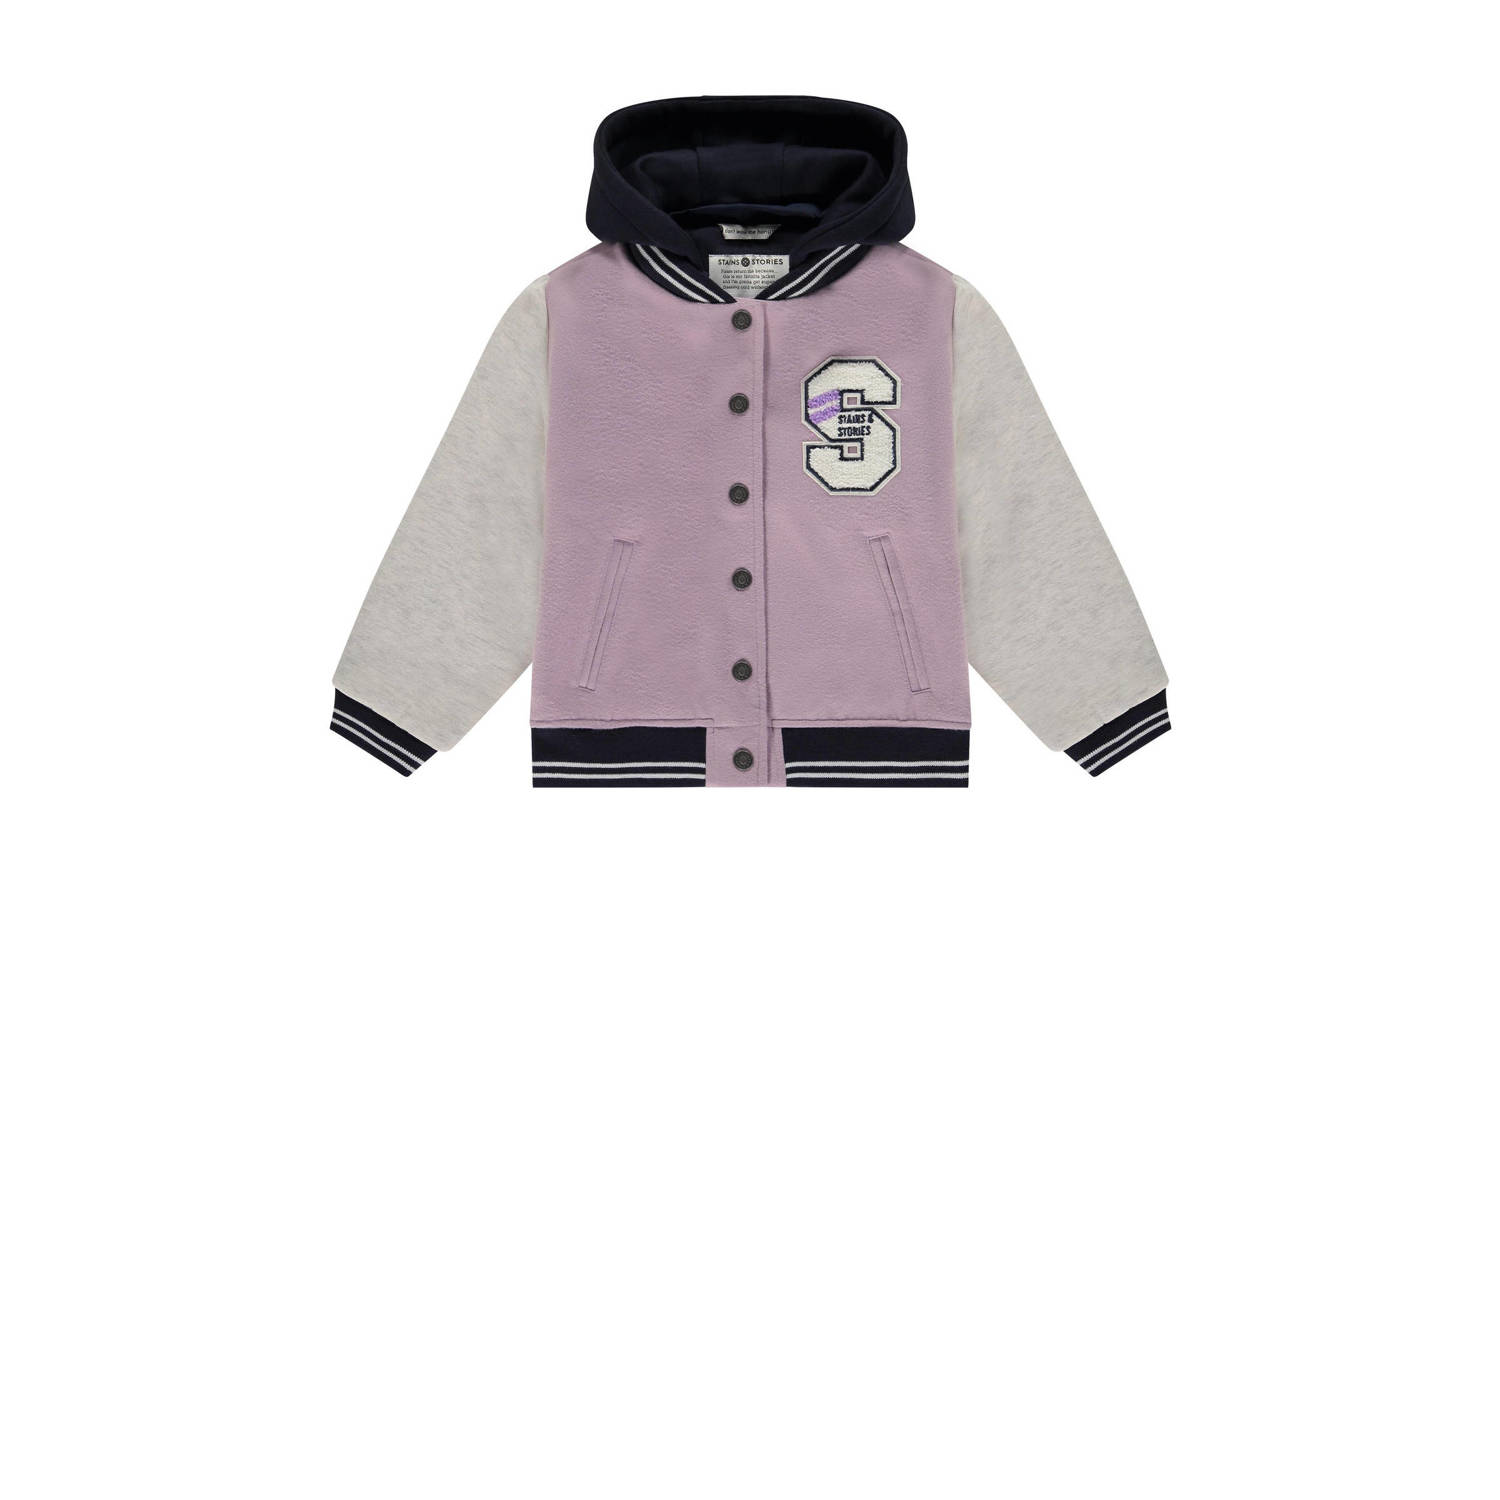 Stains&Stories baseball jacket lila wit zwart Jas Paars Meisjes Polyester Capuchon 104